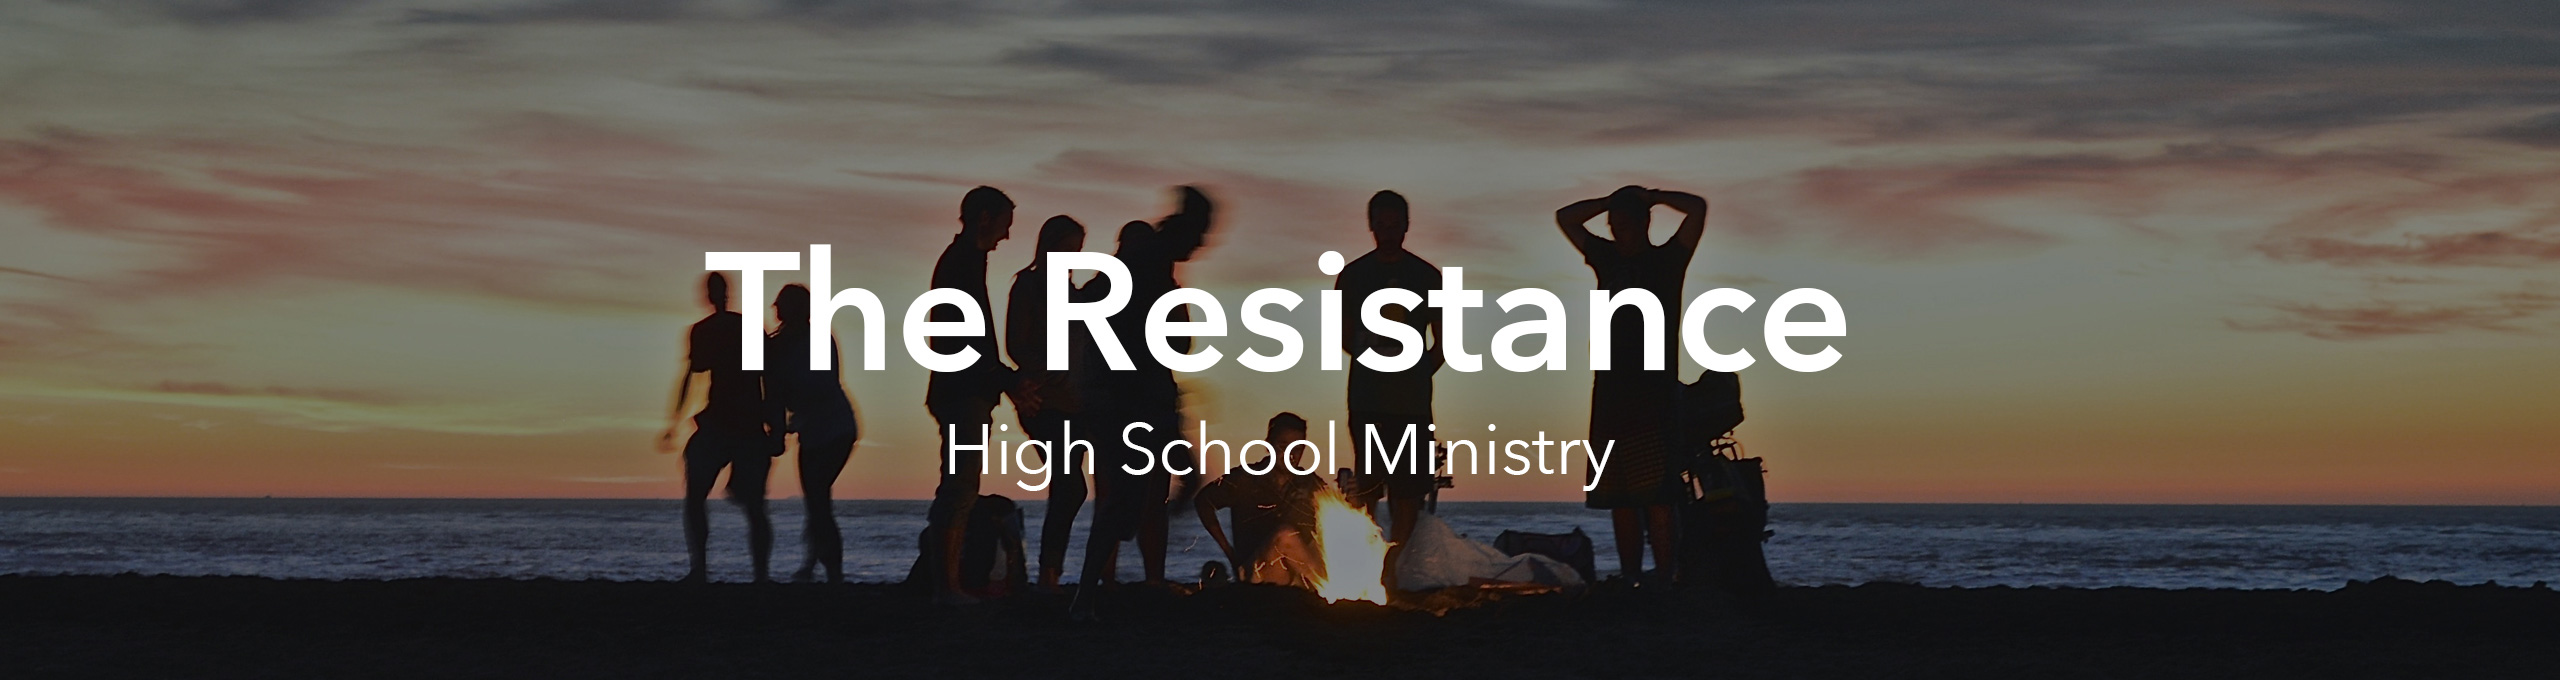 High School (The Resistance)